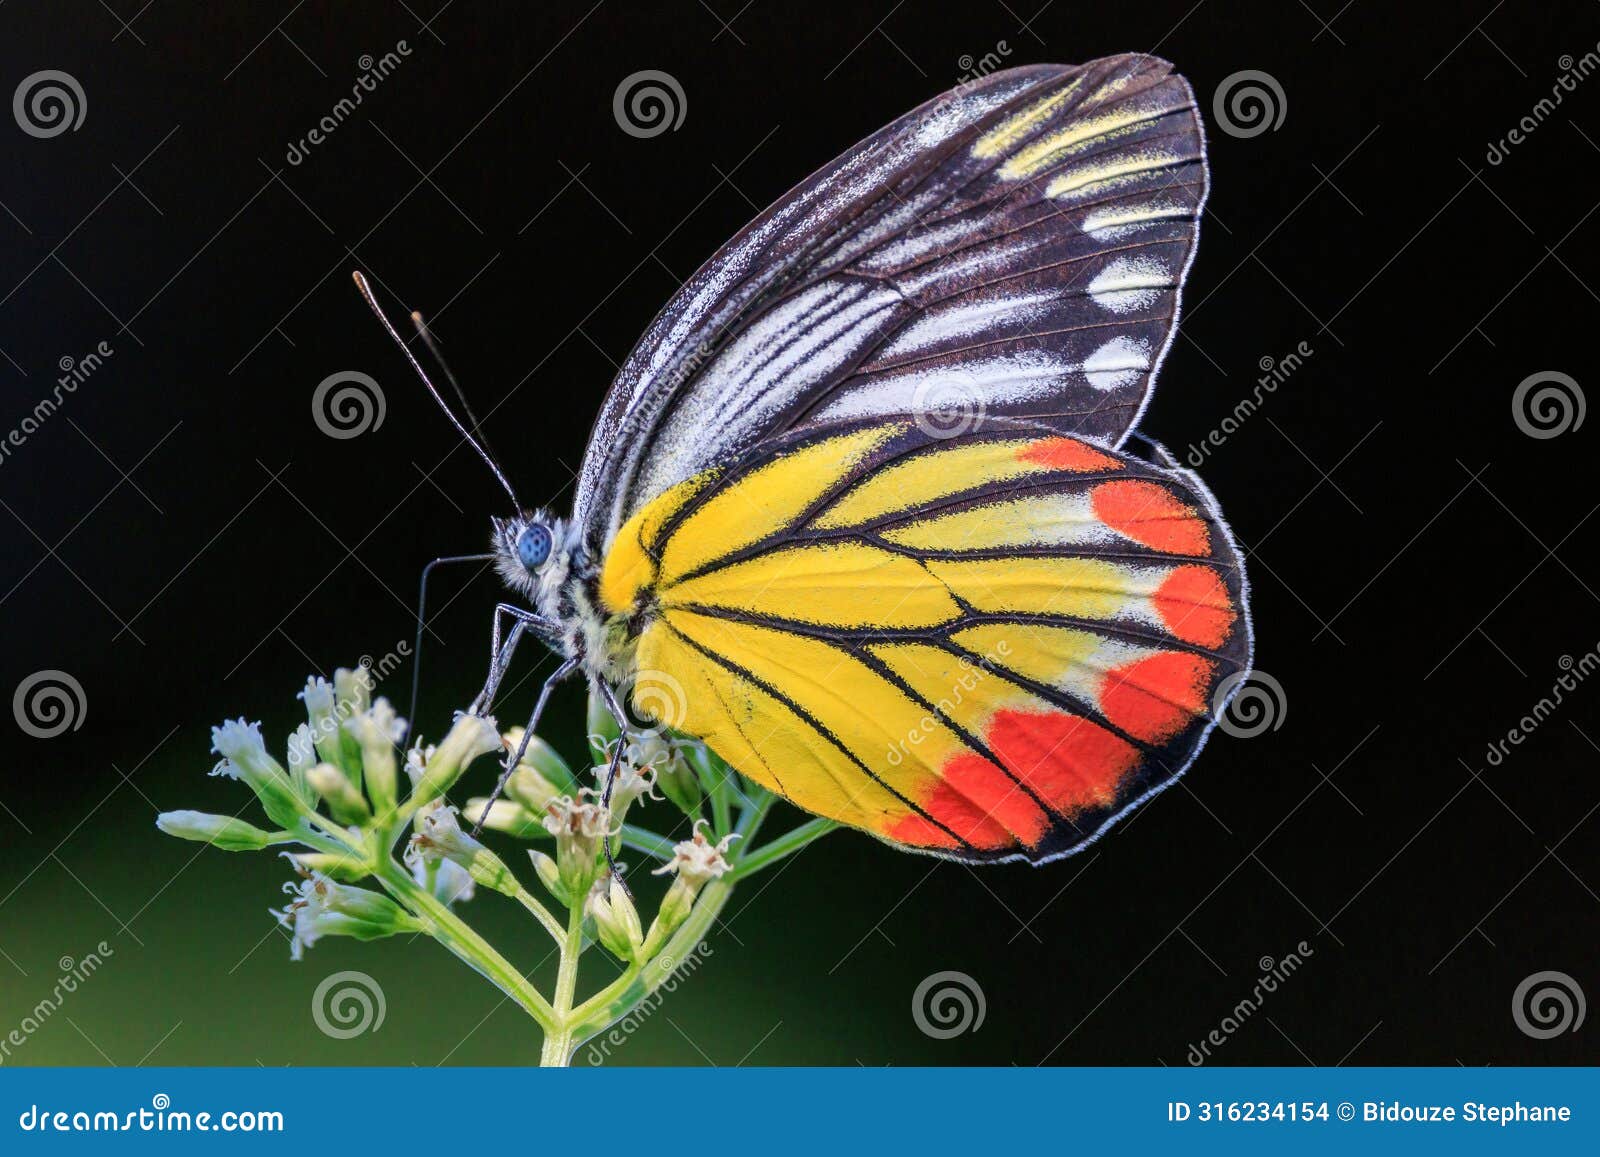 painted jezebel colorful butterfly gathering pollen